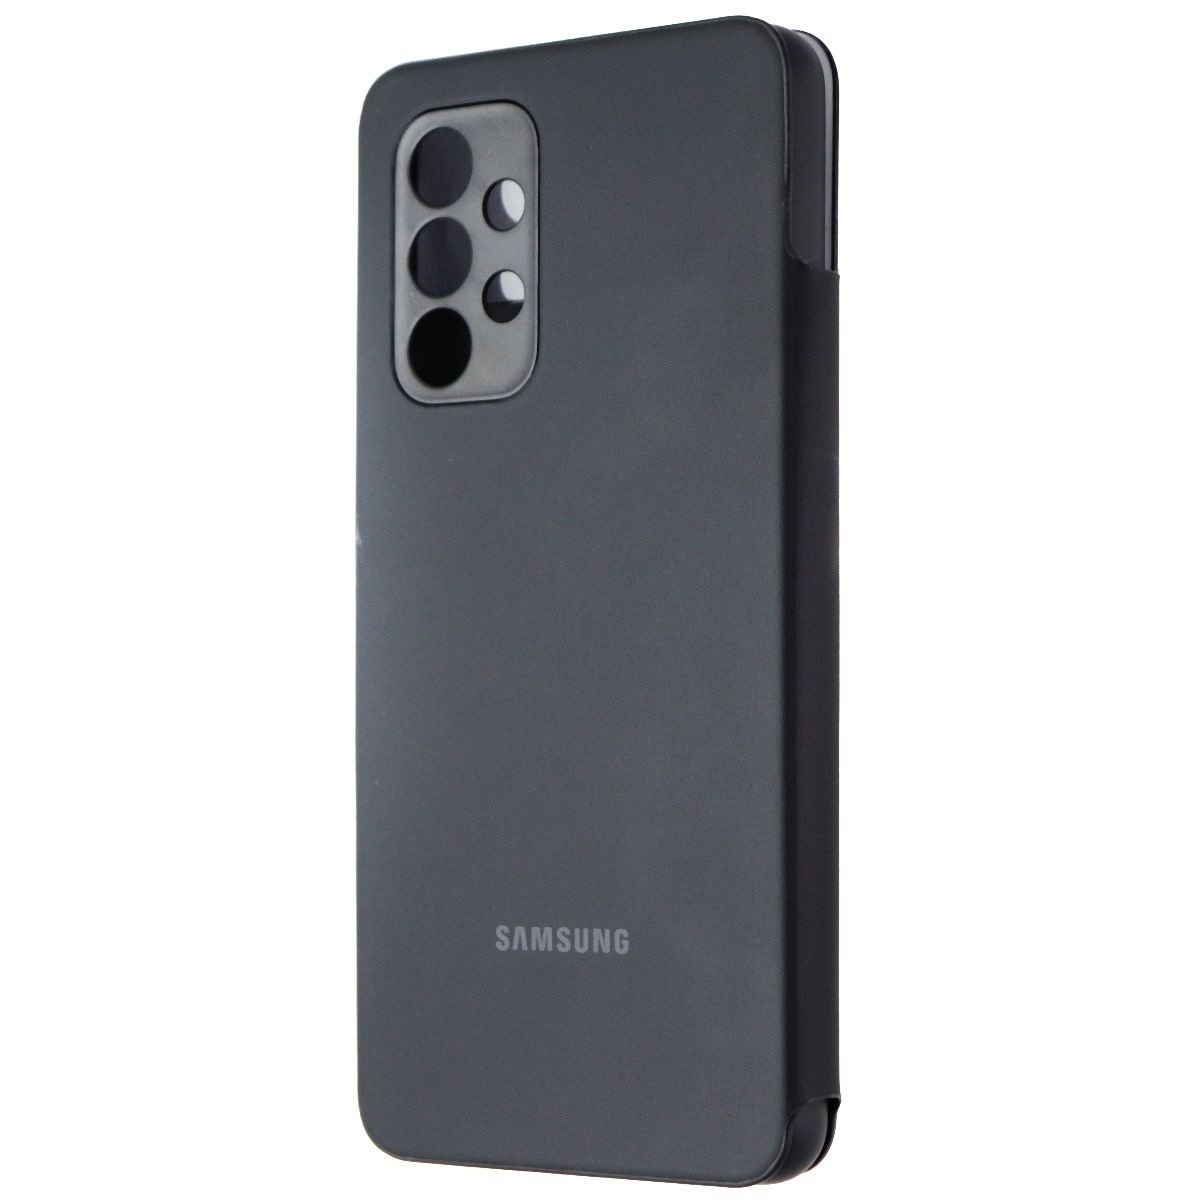 UPC 887276641881 product image for Samsung Smart S View Wallet Cover for Samsung Galaxy A53 5G - Black | upcitemdb.com